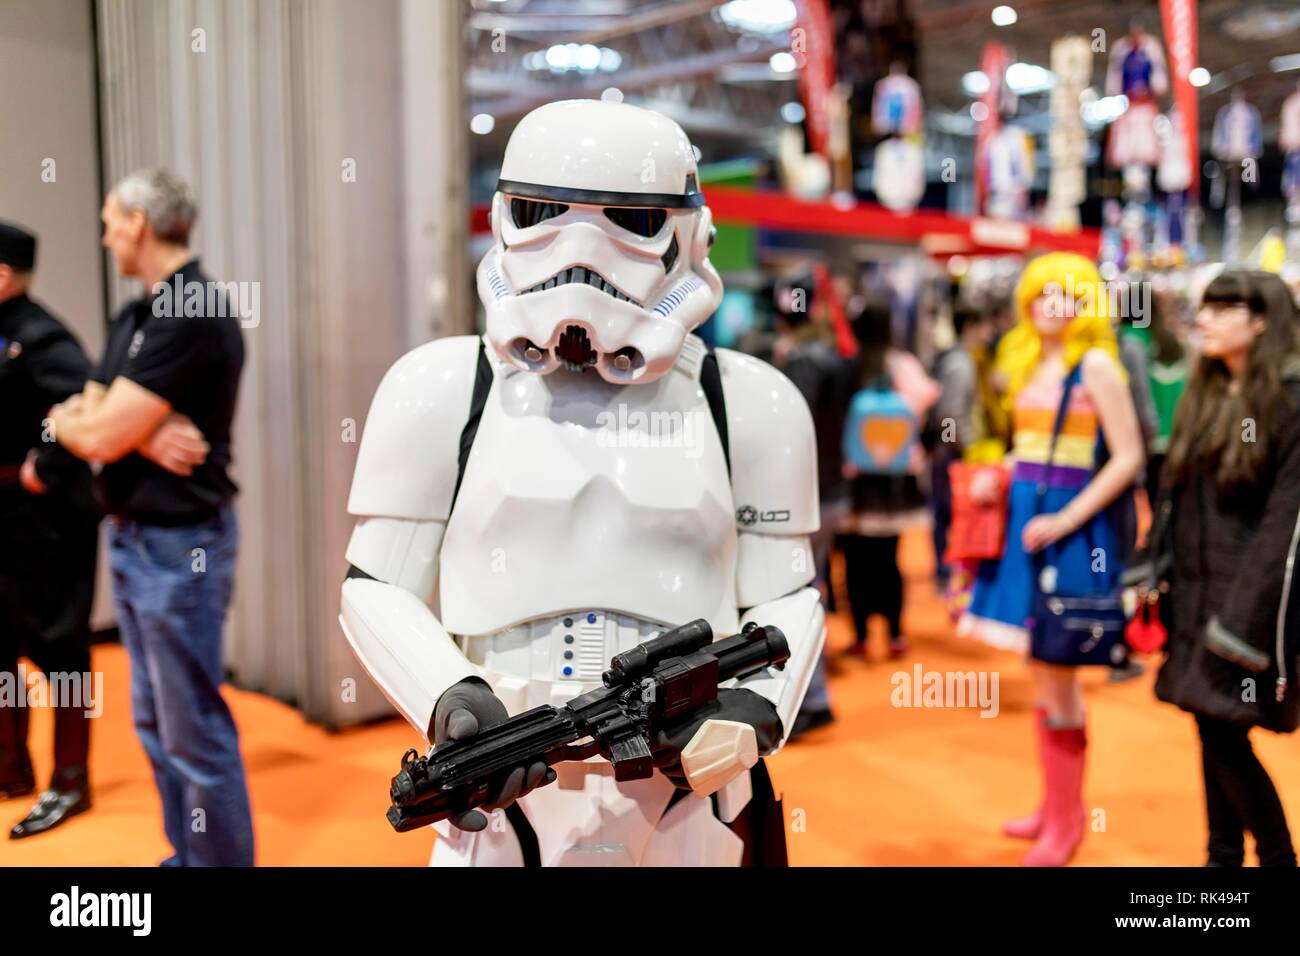 Birmingham, UK - March 17, 2018. A cosplayer dressed in a Storm Trooper costume from Star Wars movies at a comic con in Birmingham, UK pointing a gun Stock Photo